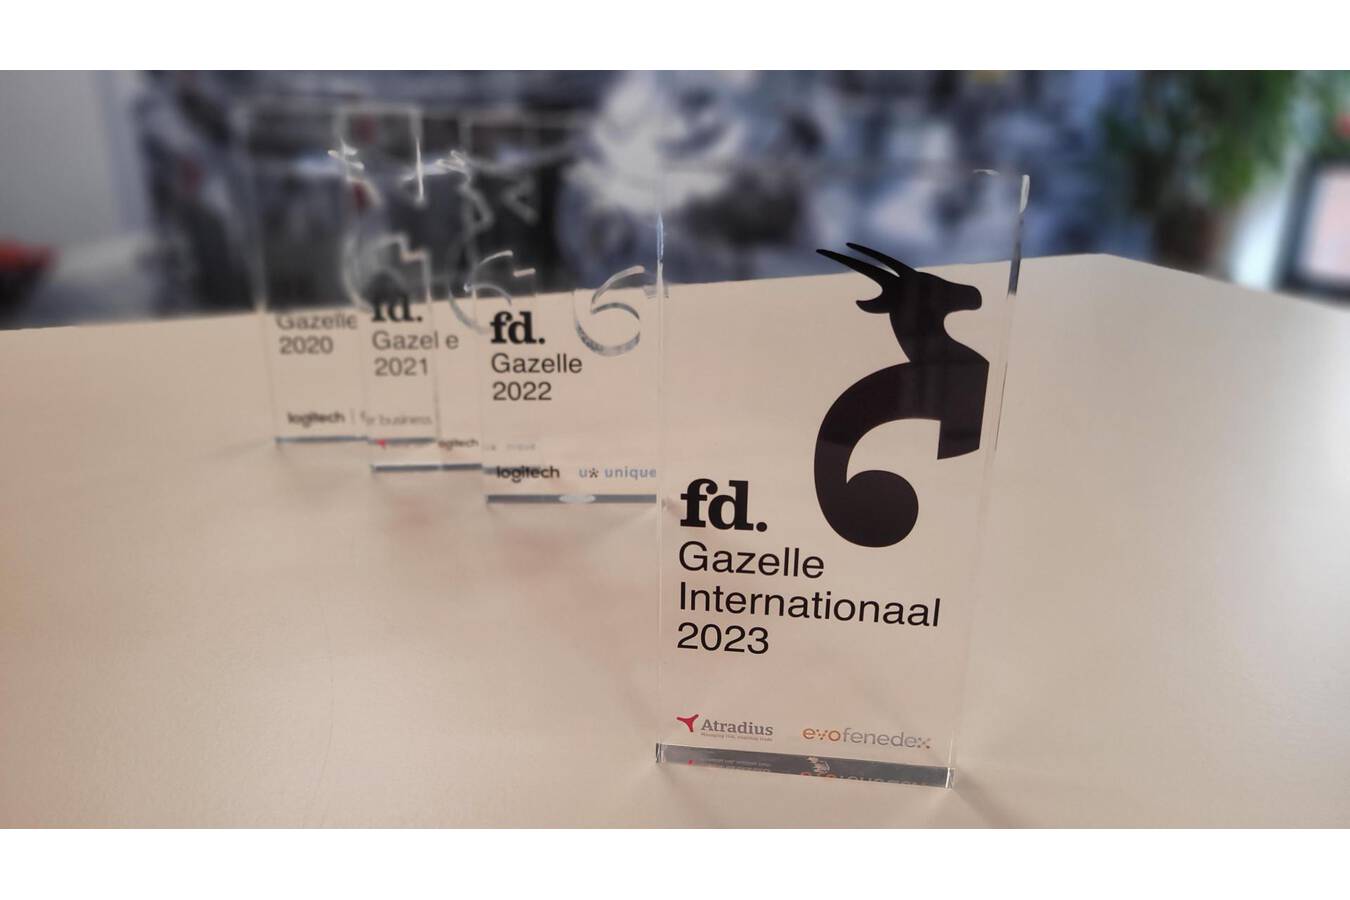 Foeth also recognized as fast-growing on international scale After three years as an FD Gazelle (awarded by a leading Dutch financial newspaper), Foeth may now also call itself Gazelle International